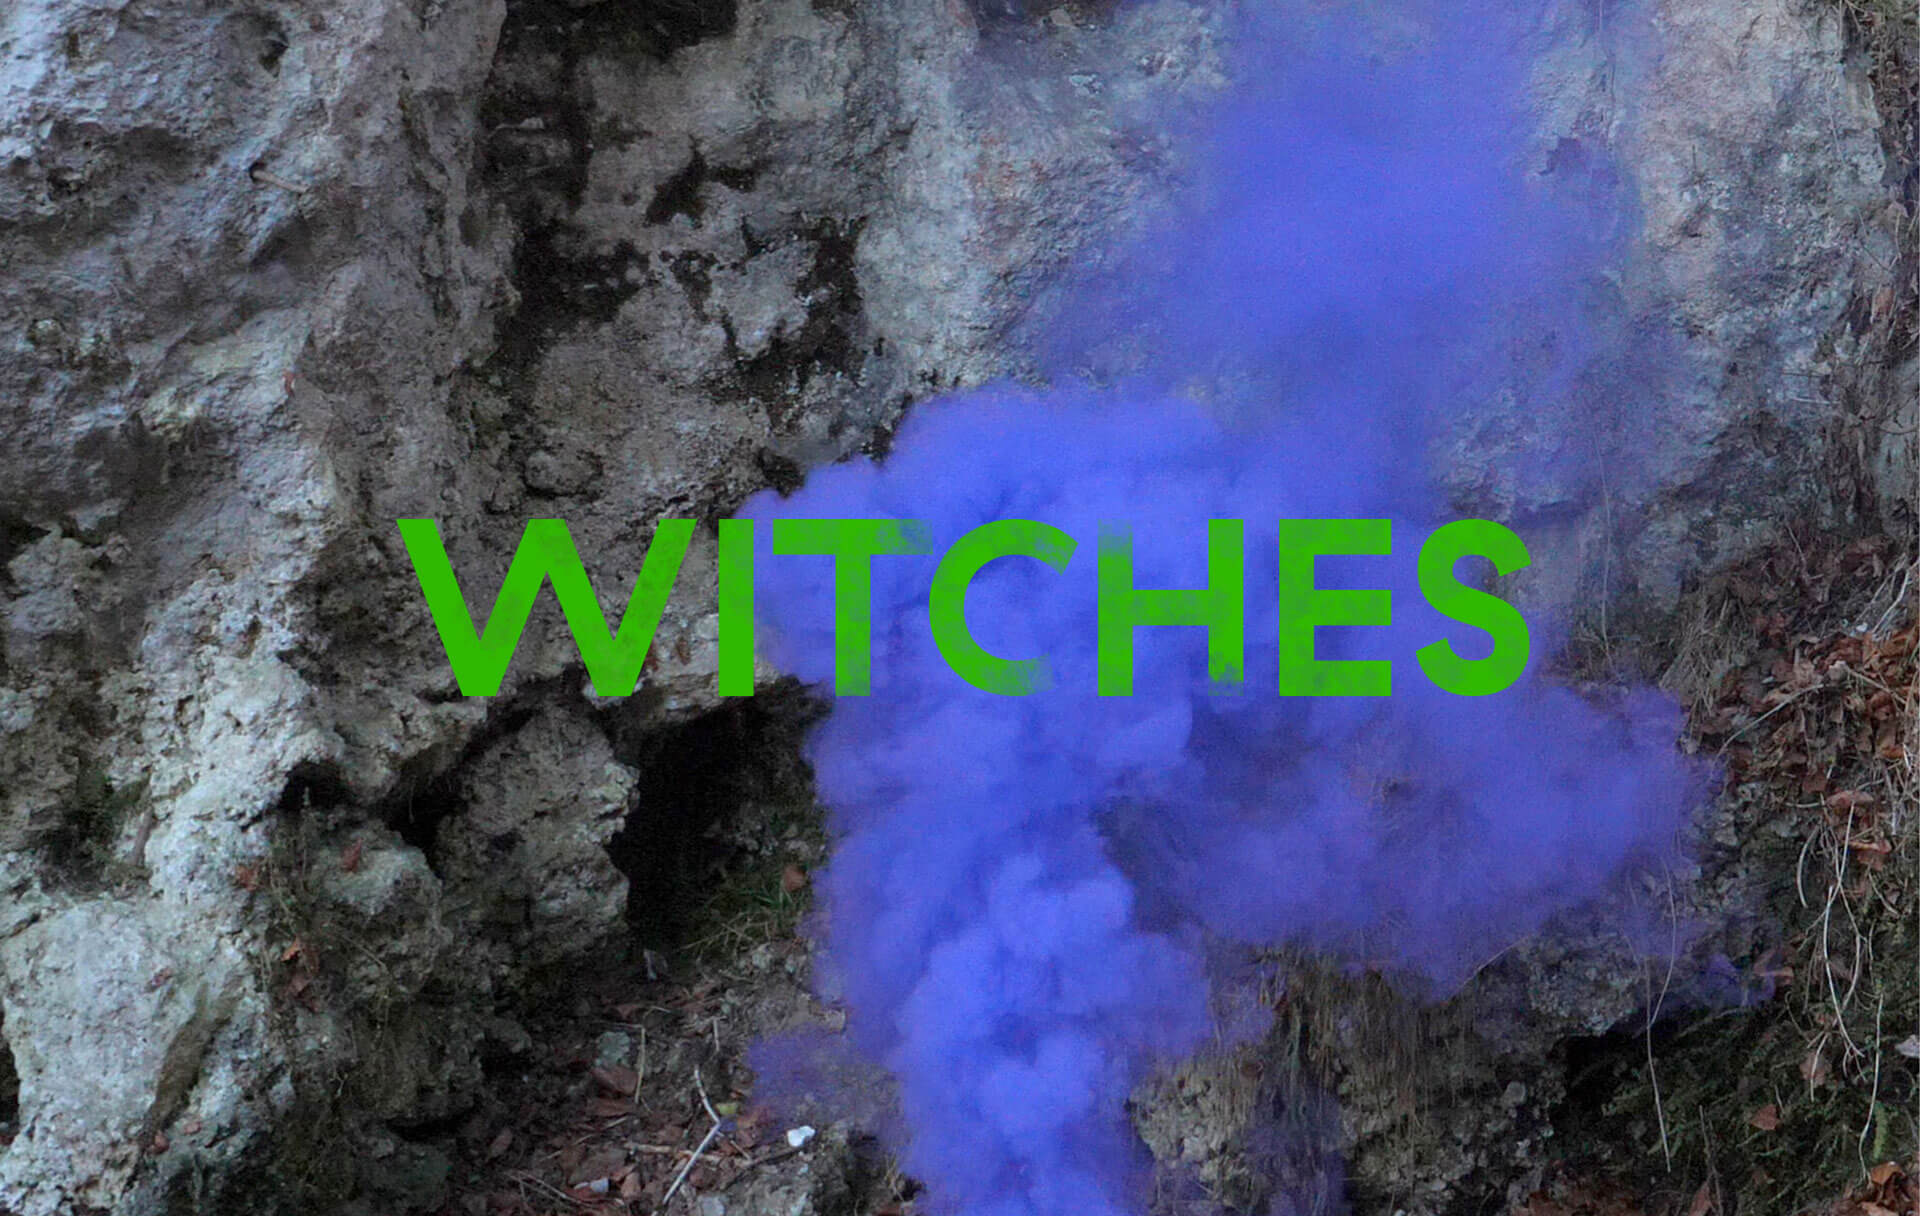 WITCHES